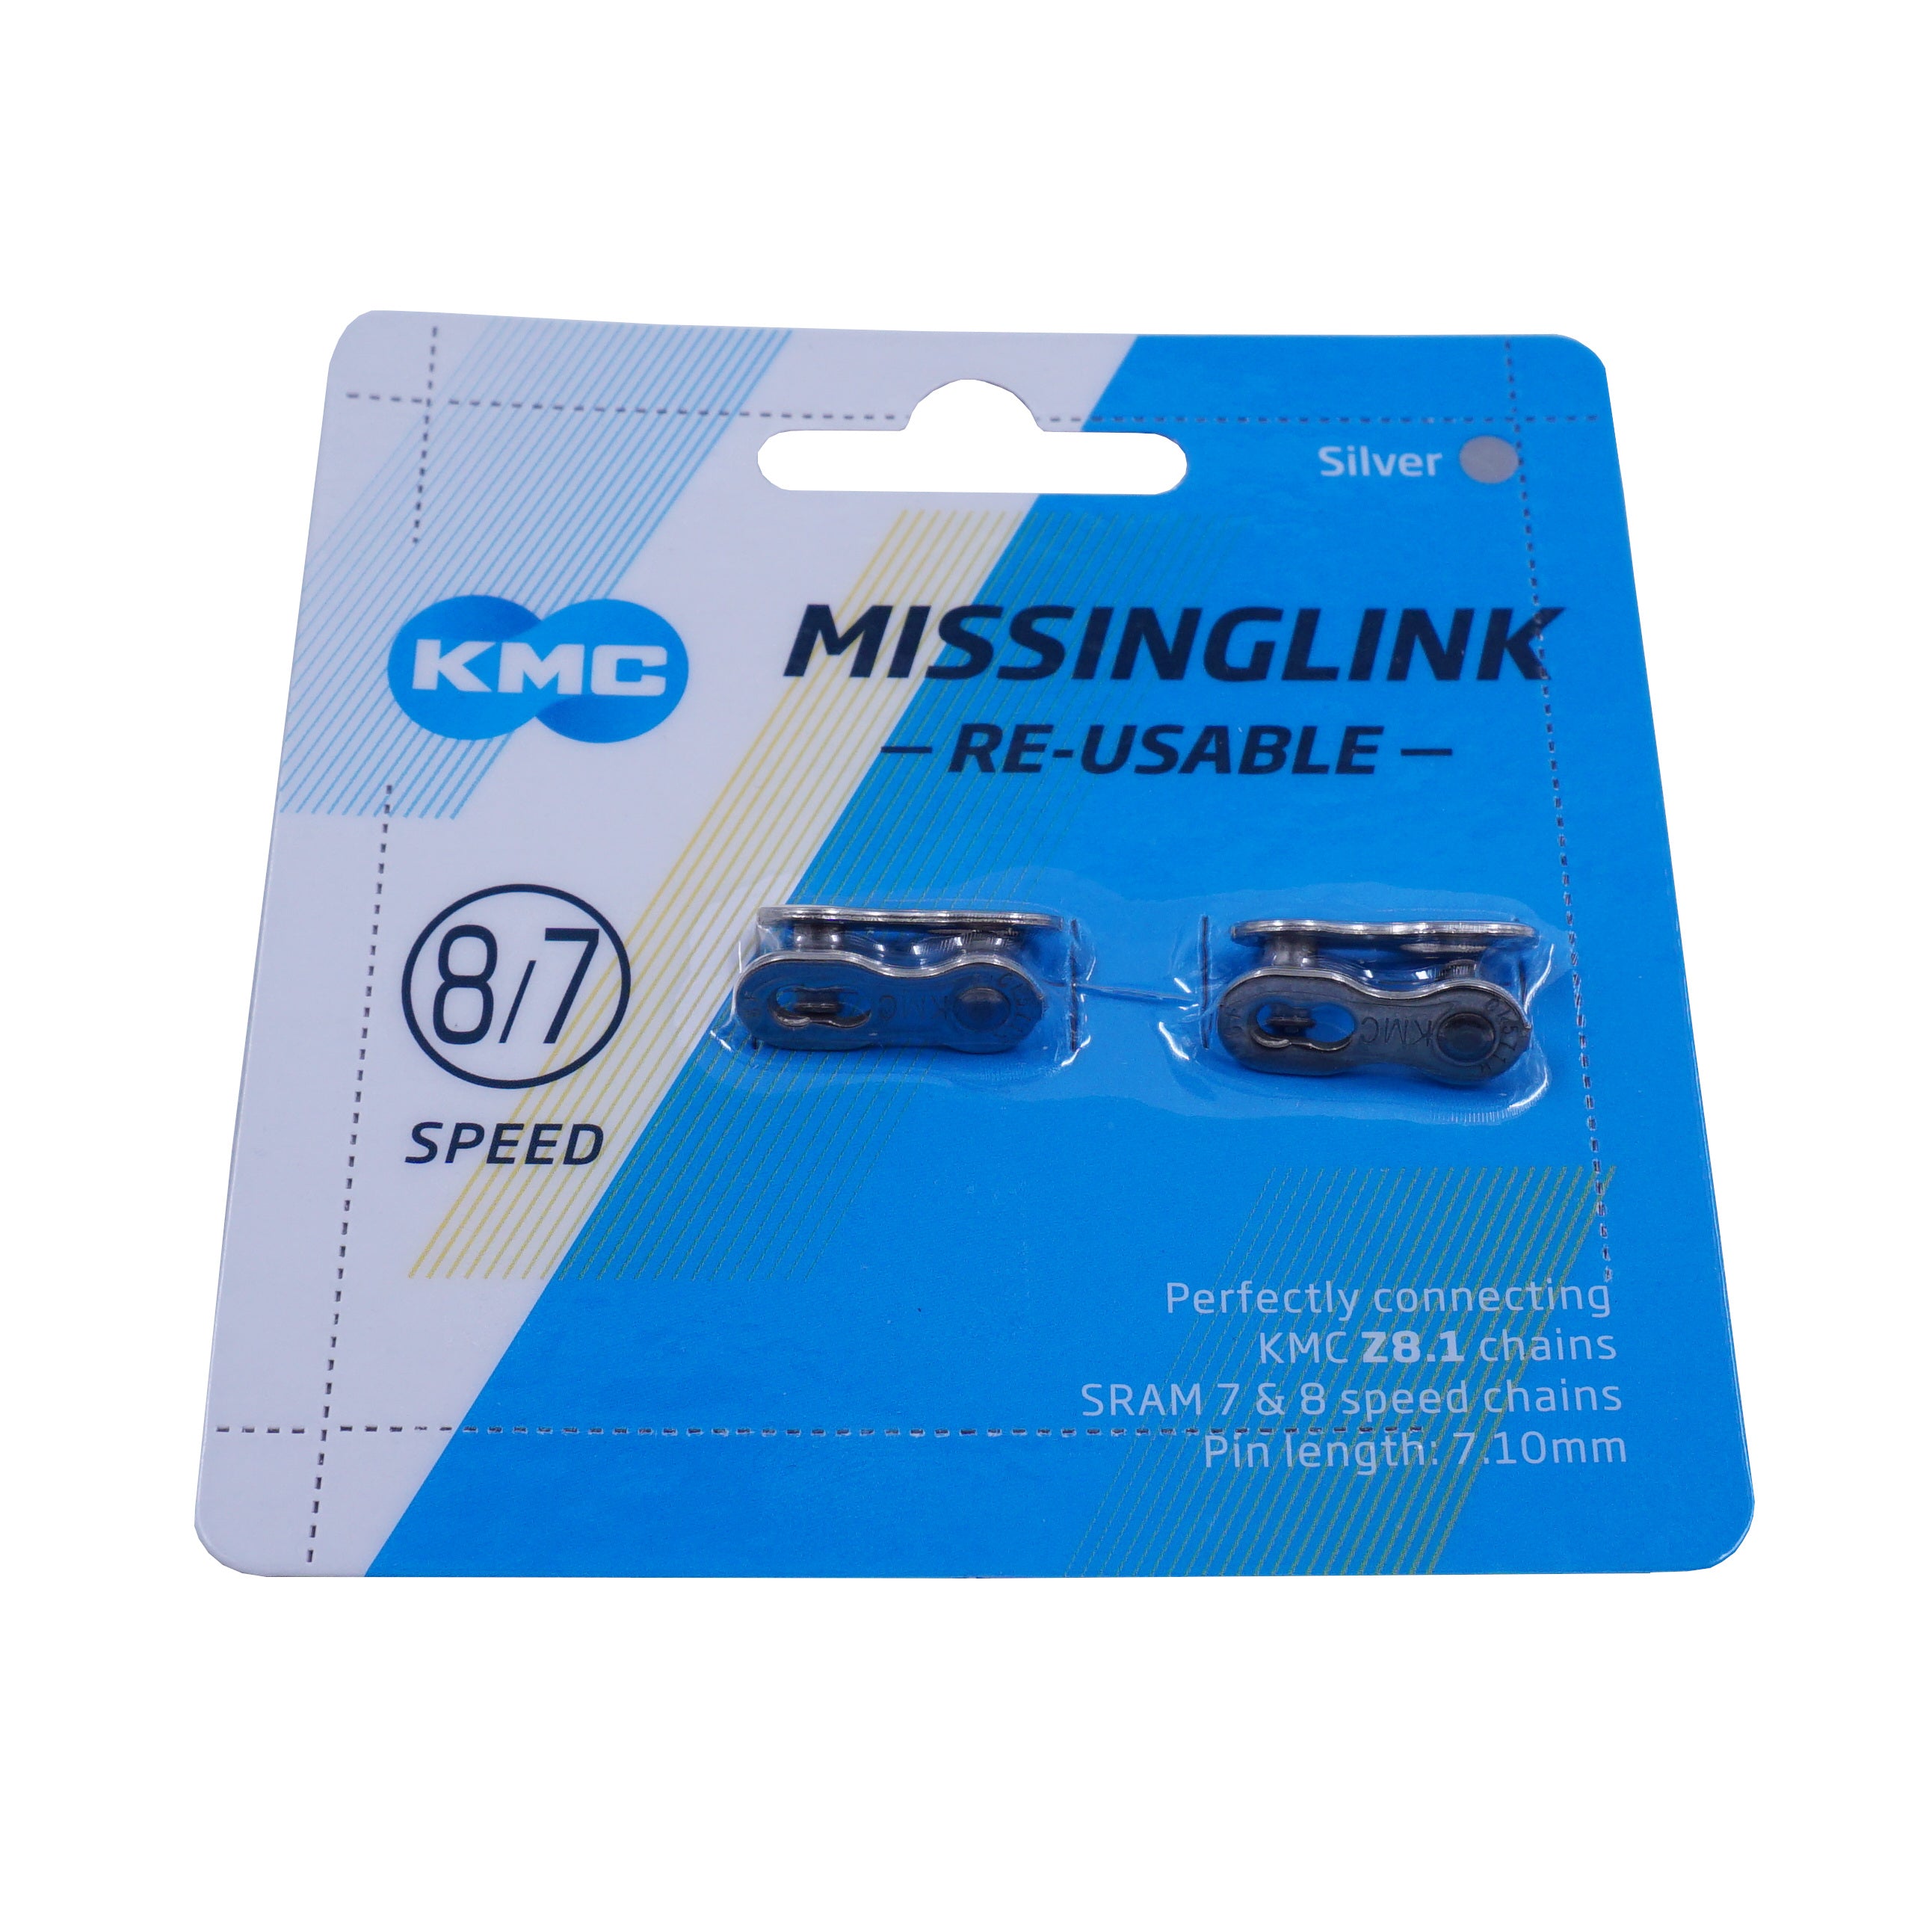 KMC CL571R Missing Link 8 Speed 7.1mm Masterlink (CARD OF 2) - The Bikesmiths